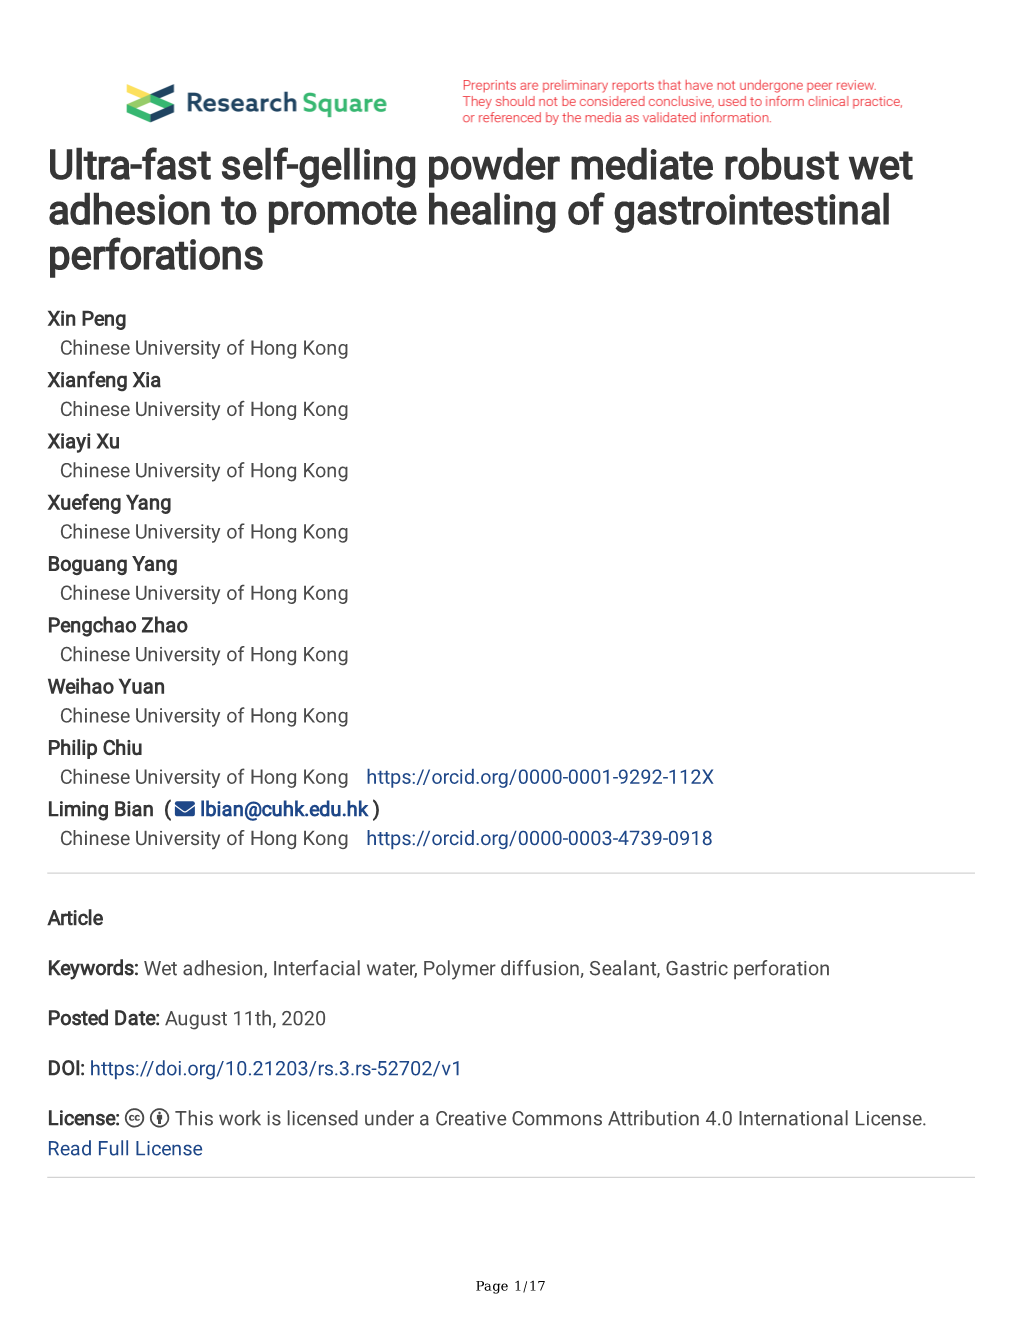 Ultra-Fast Self-Gelling Powder Mediate Robust Wet Adhesion to Promote Healing of Gastrointestinal Perforations